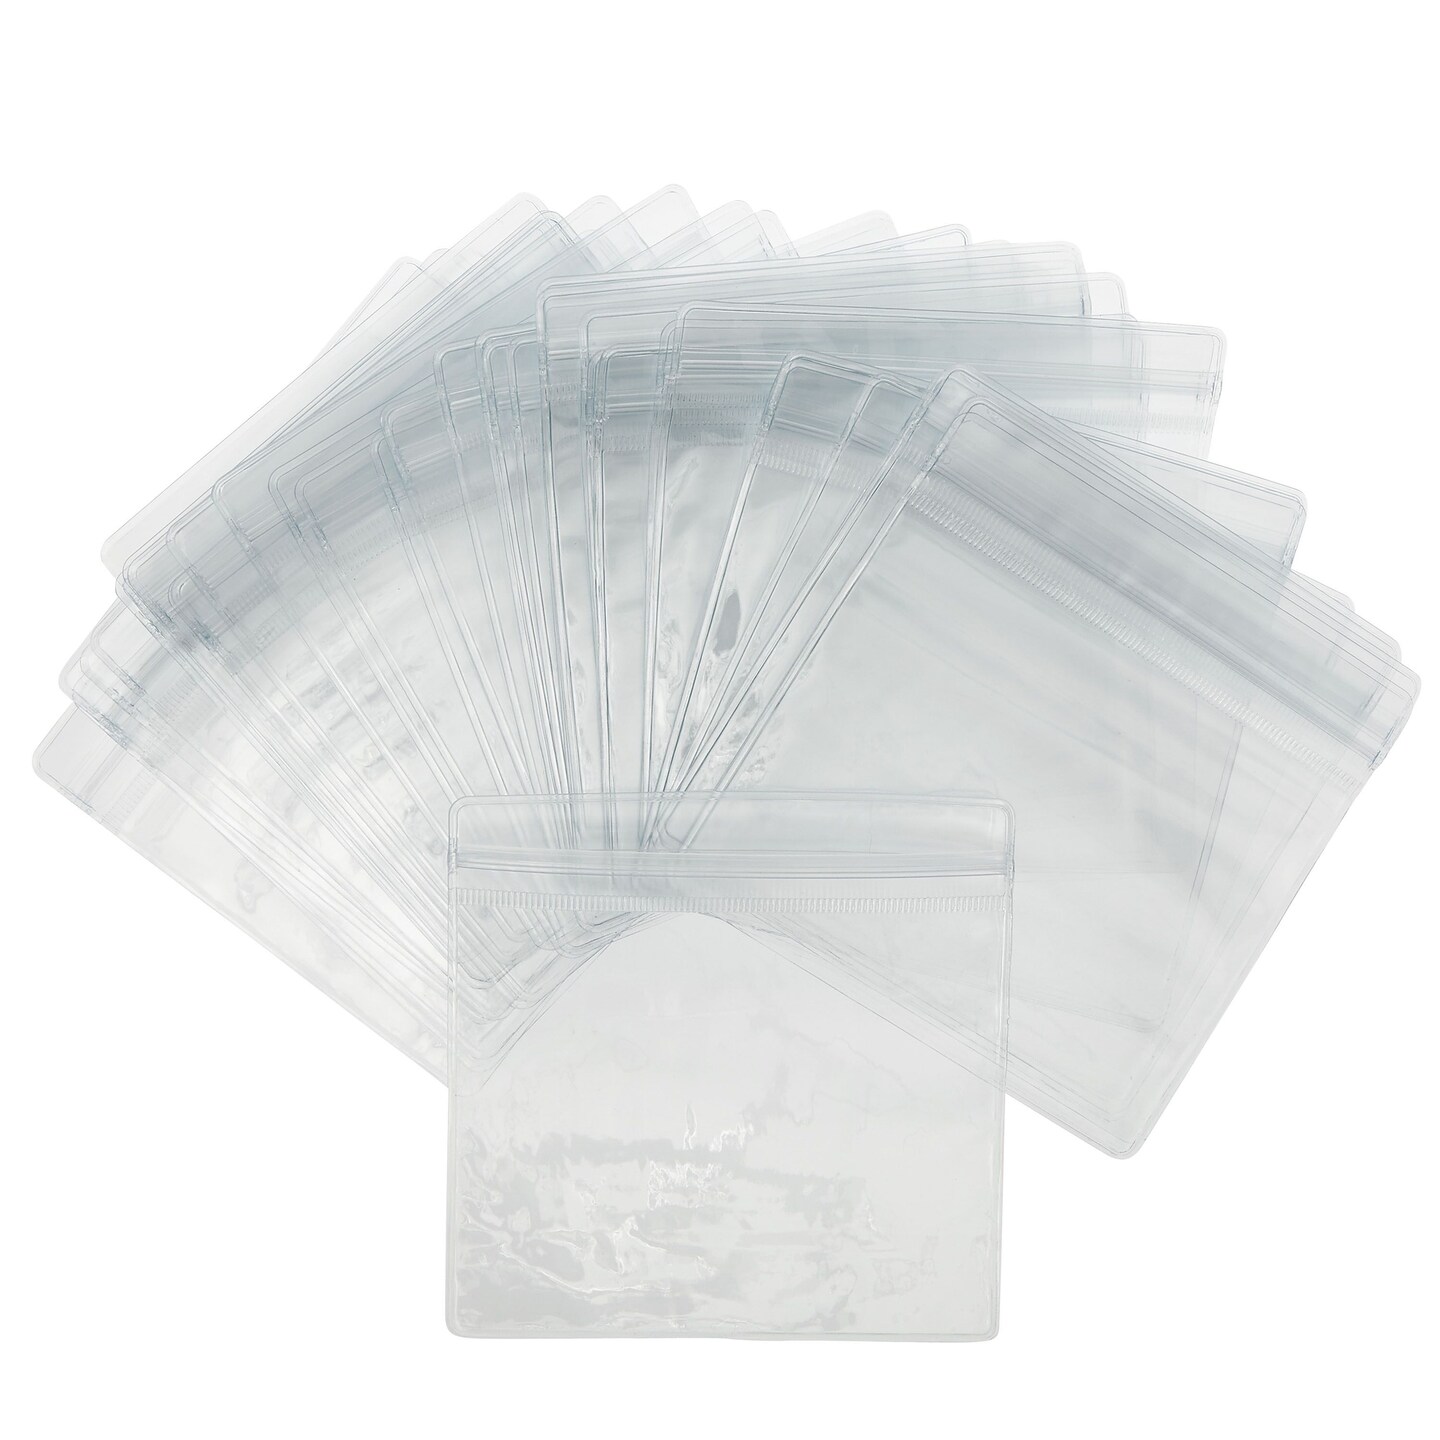 Small Plastic Baggies 2 mil 300pcs 2 x 3 inch Resealable Clear Ziplock  Storage Bags for Pills Jewelry Earring Diamond Painting